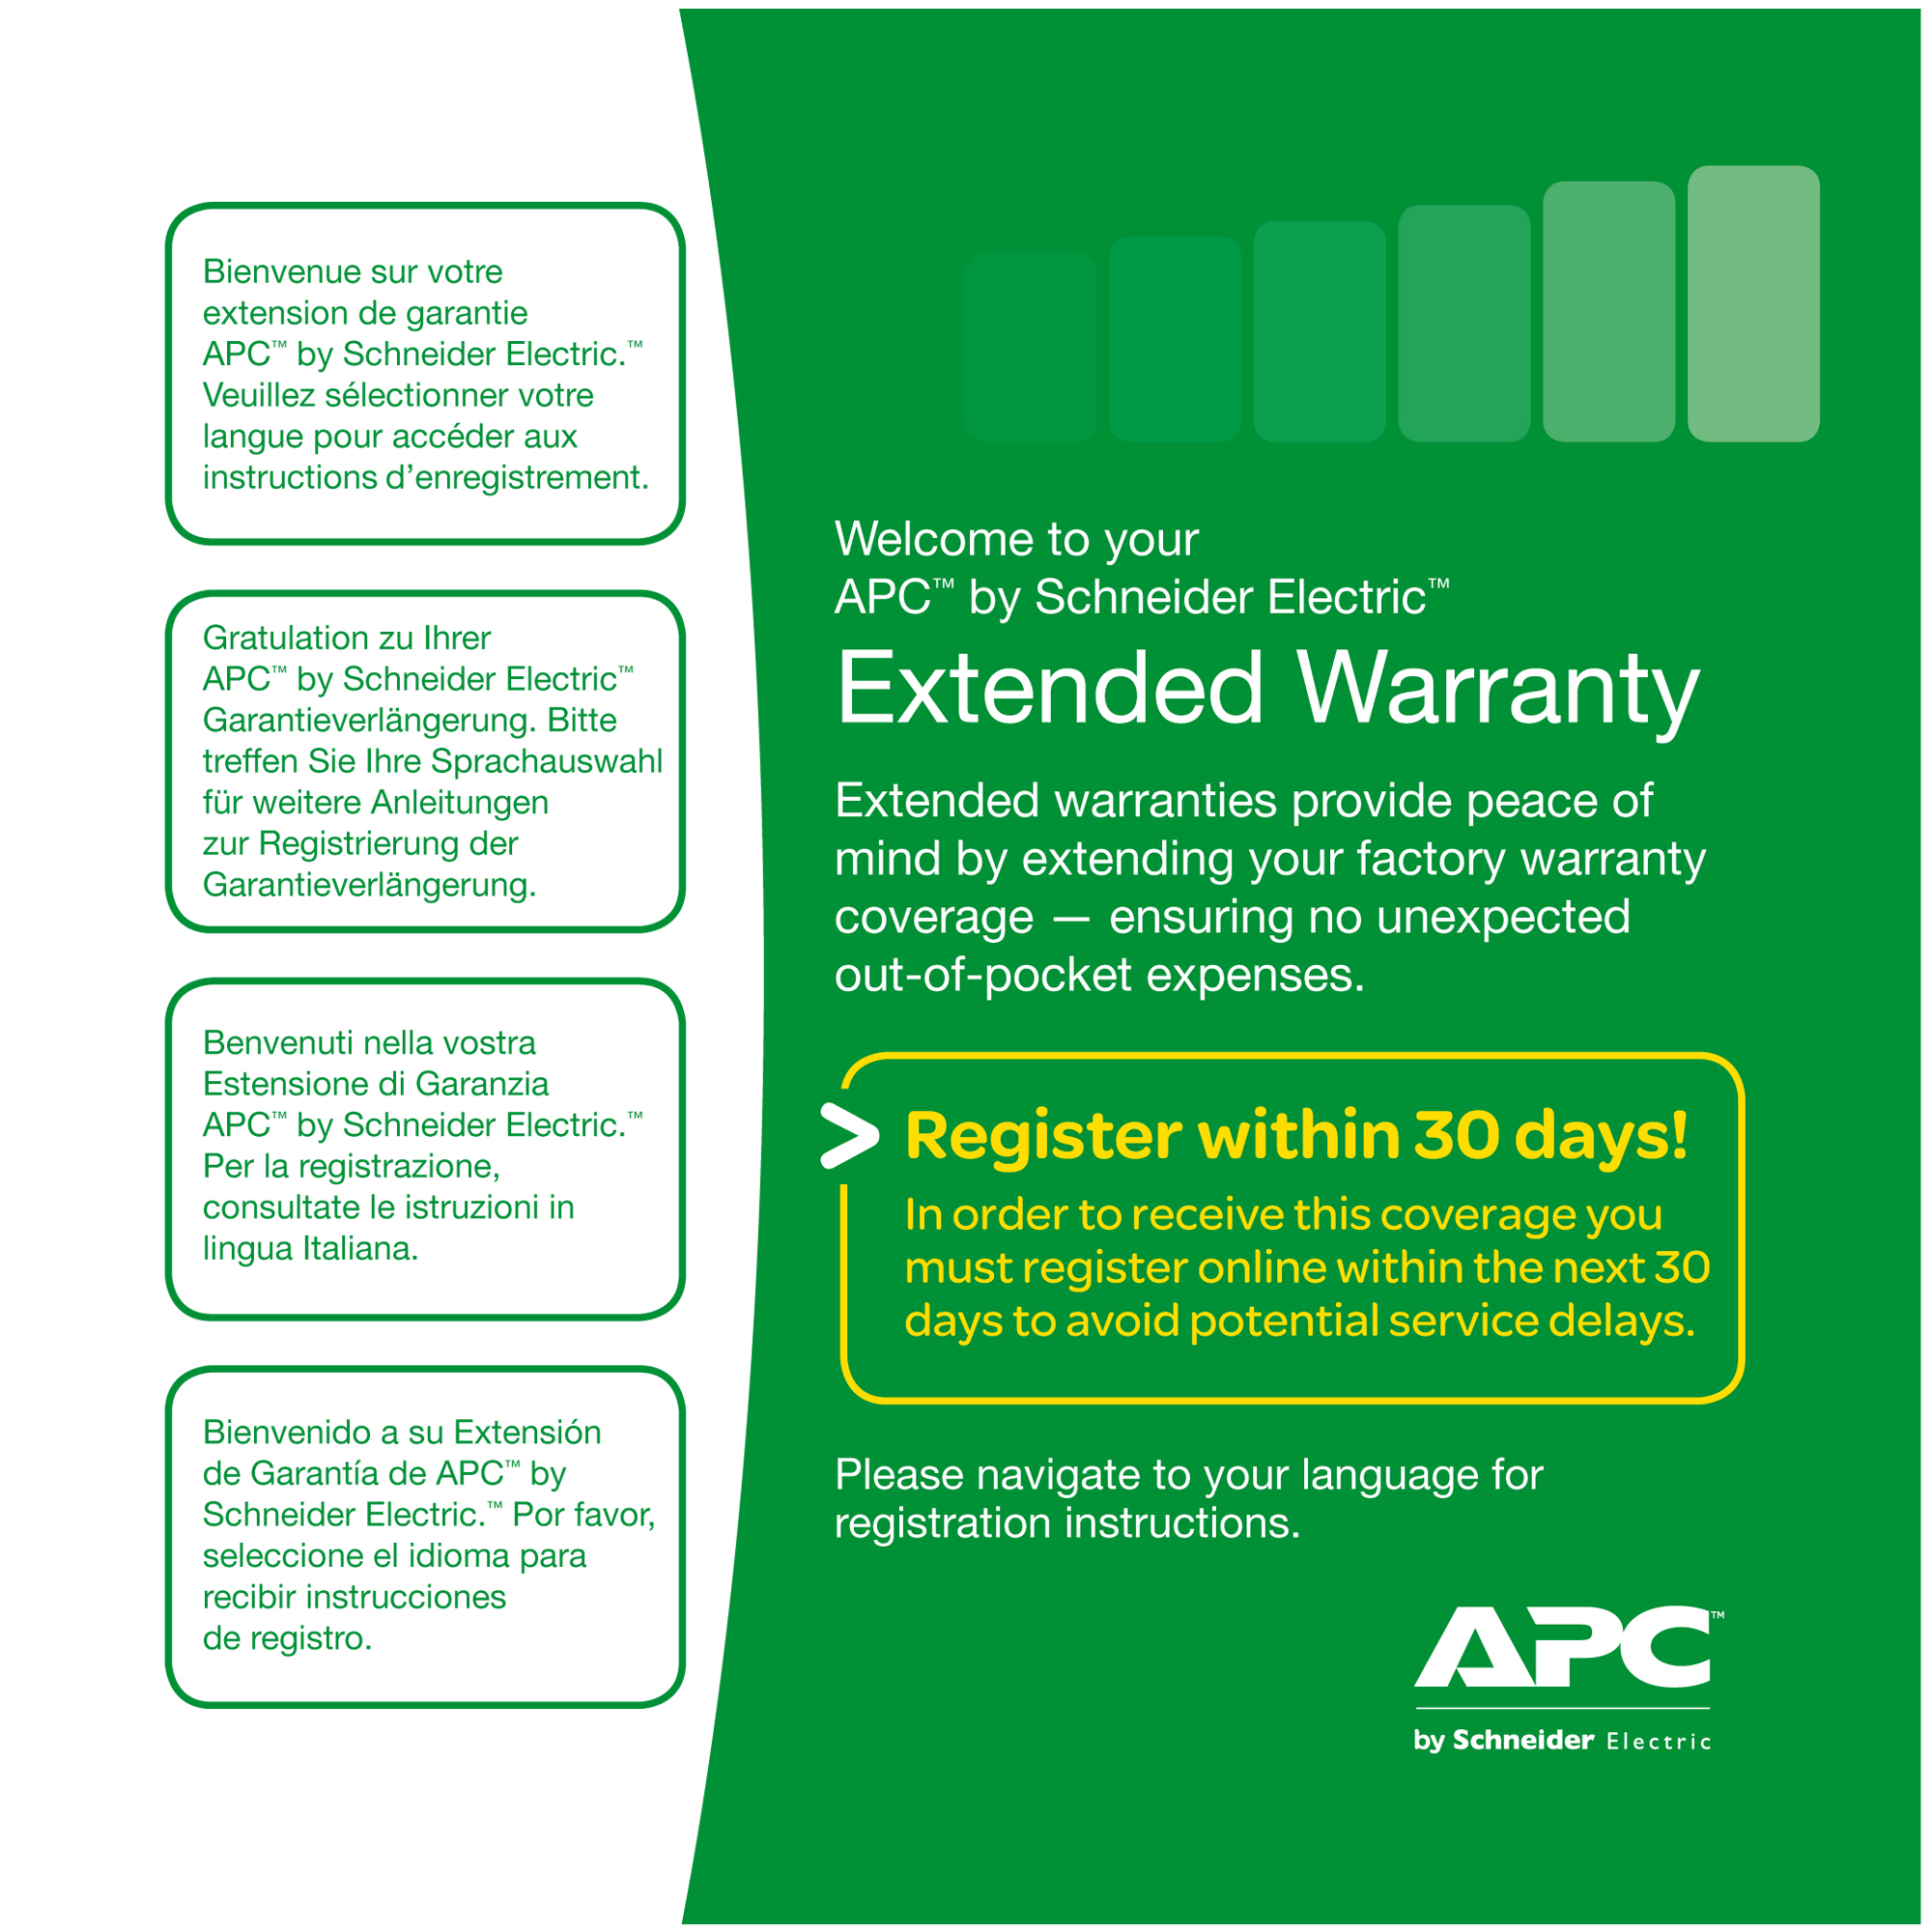 Apc - Services And Licenses      Extended Warranty 3yr               Stockable Part Number In            Wbextwar3yr-sp-08